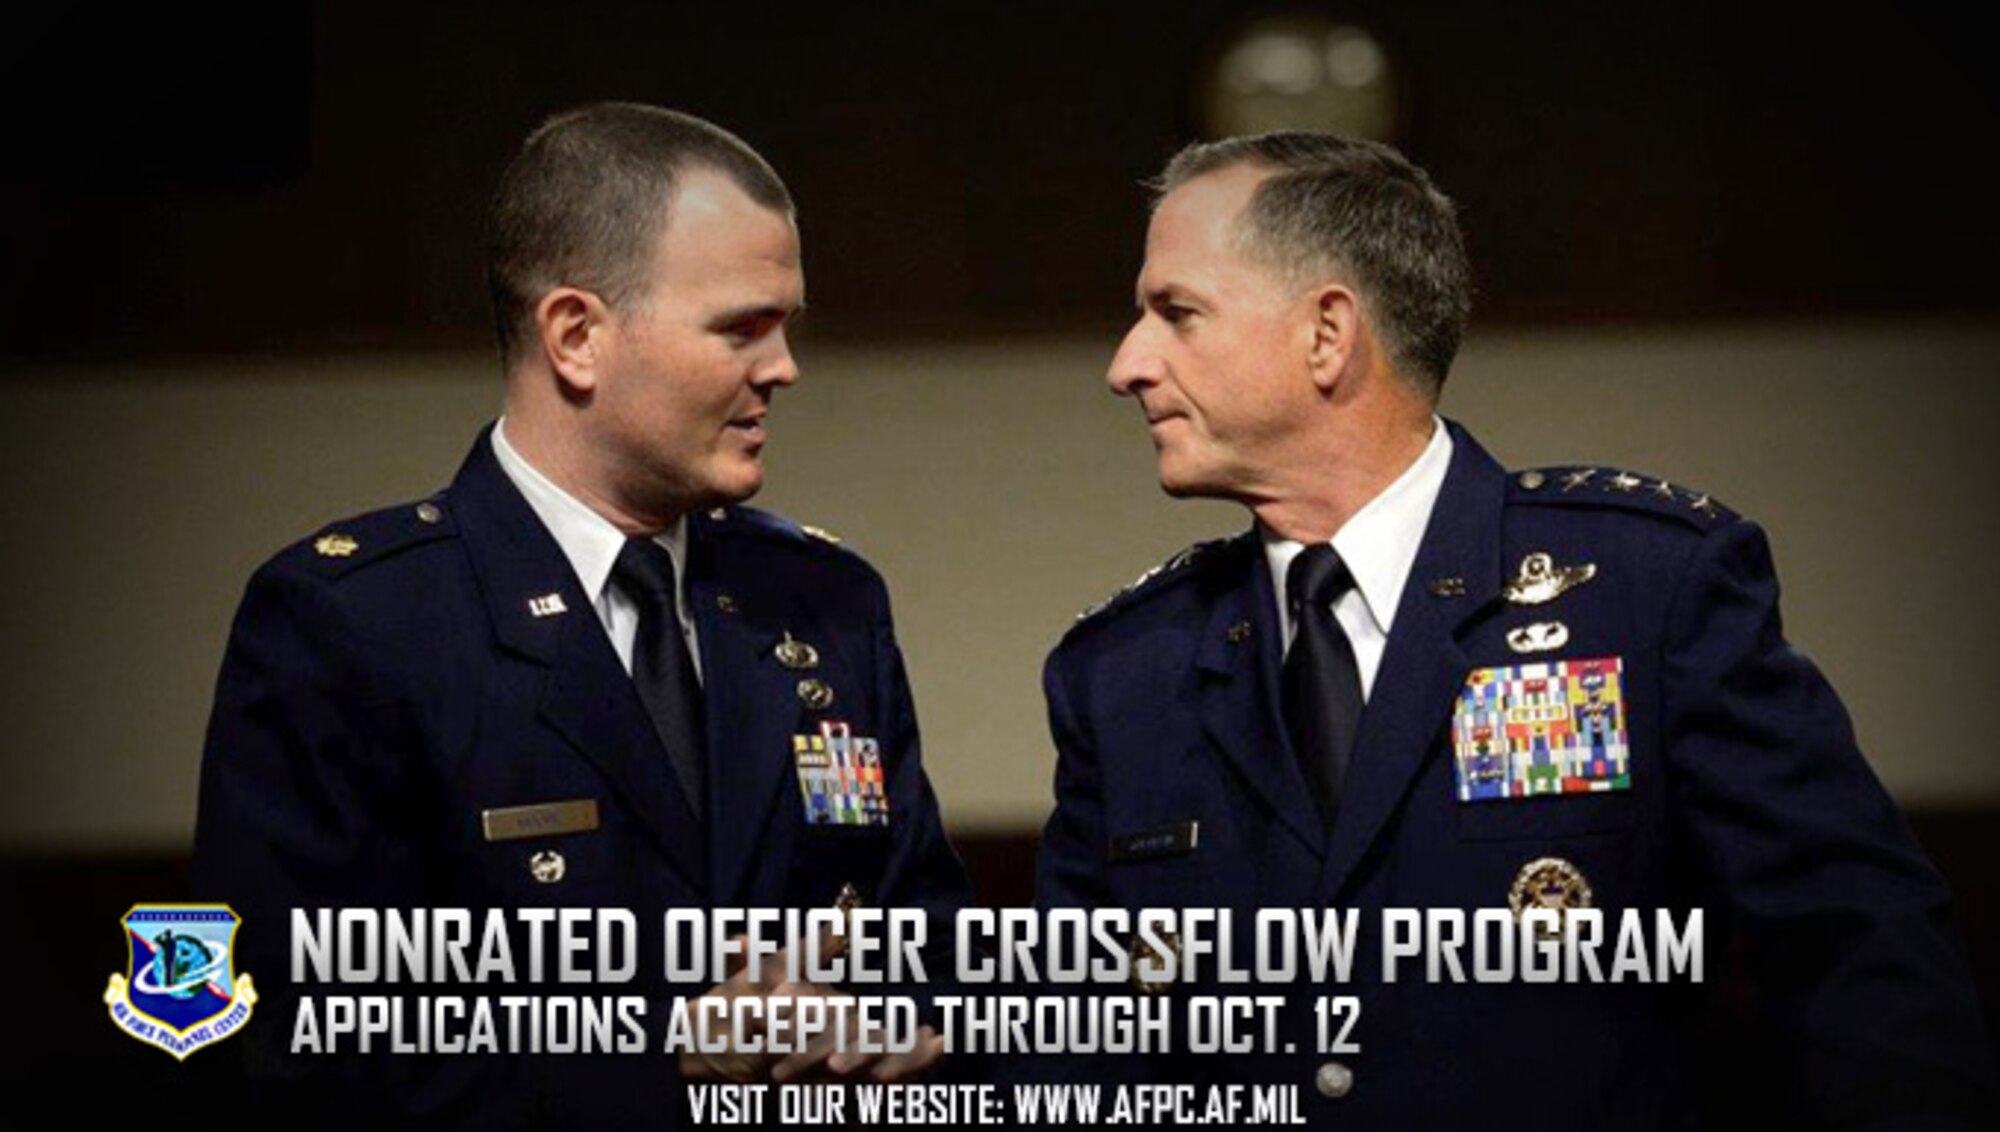 Competitive career opportunities exist for officers in career groups 2004 – 2008 and 2009 – 2013 in certain career fields through the 2017 nonrated line officer crossflow program. Maj. Christopher Moore (left), a public affairs crossflow, just completed an assignment as the public affairs advisor to the then Vice Chief of Staff of the Air Force, proving crossflow officers can be competitive. Applications are due to AFPC by Oct. 12, 2016. (U.S. Air Force courtesy photo)